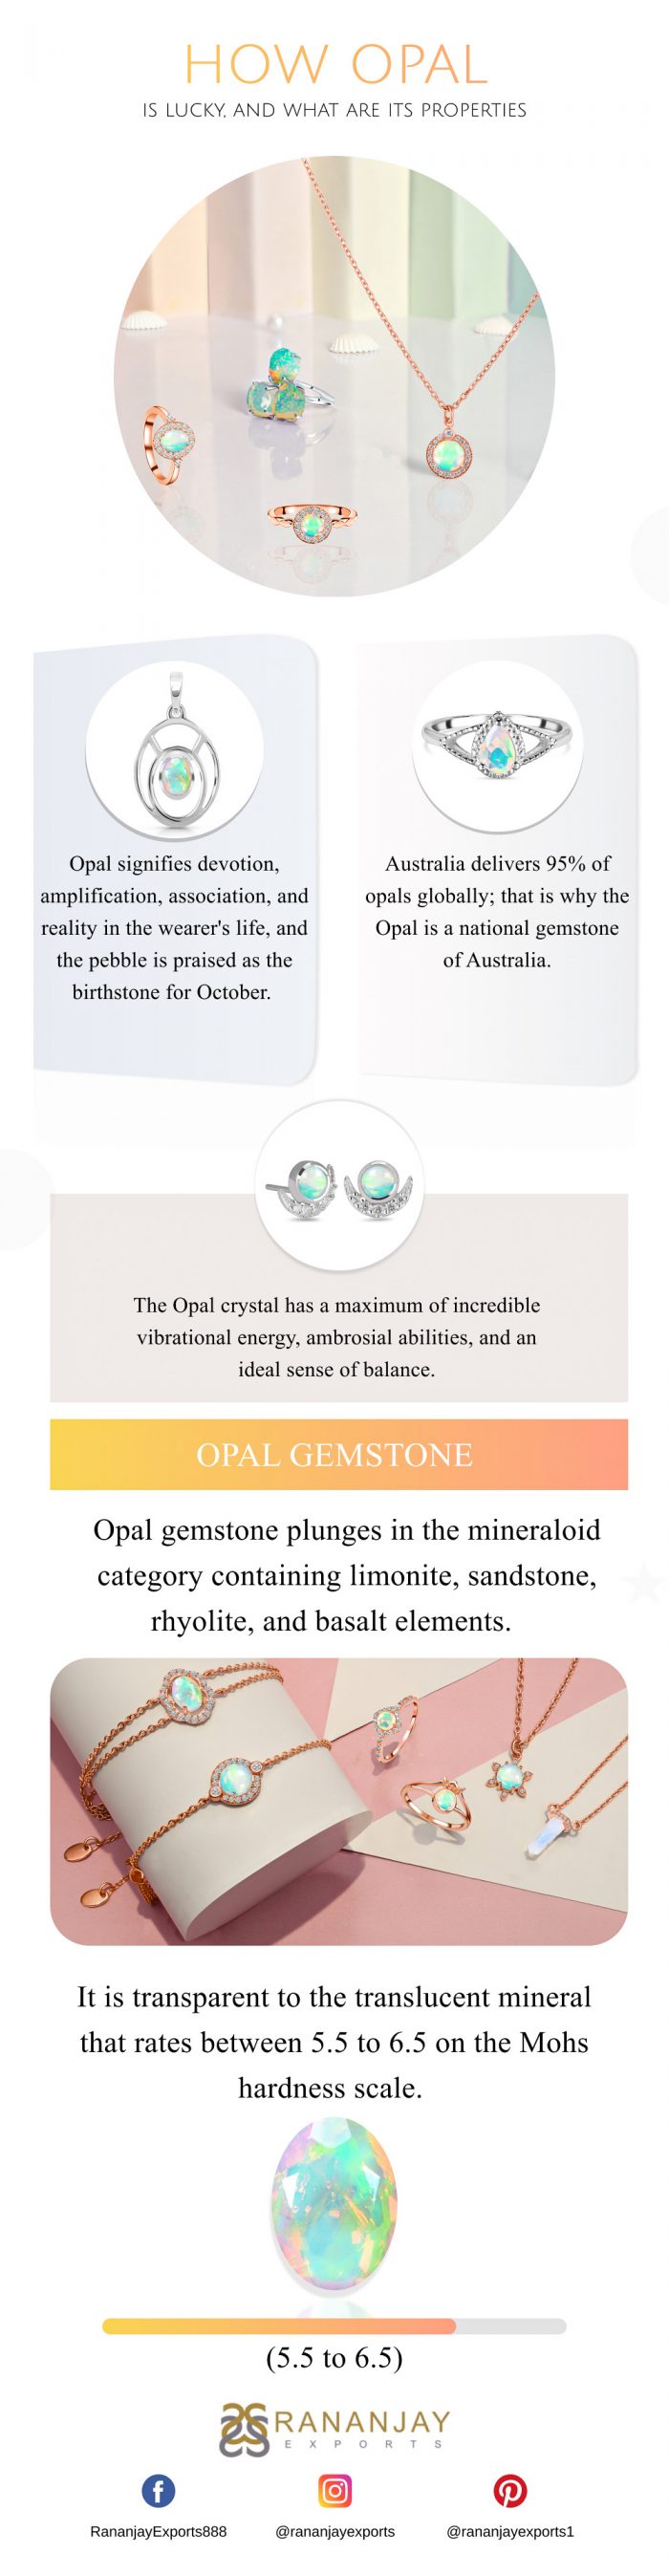 How Opal is Lucky, and What are its Properties